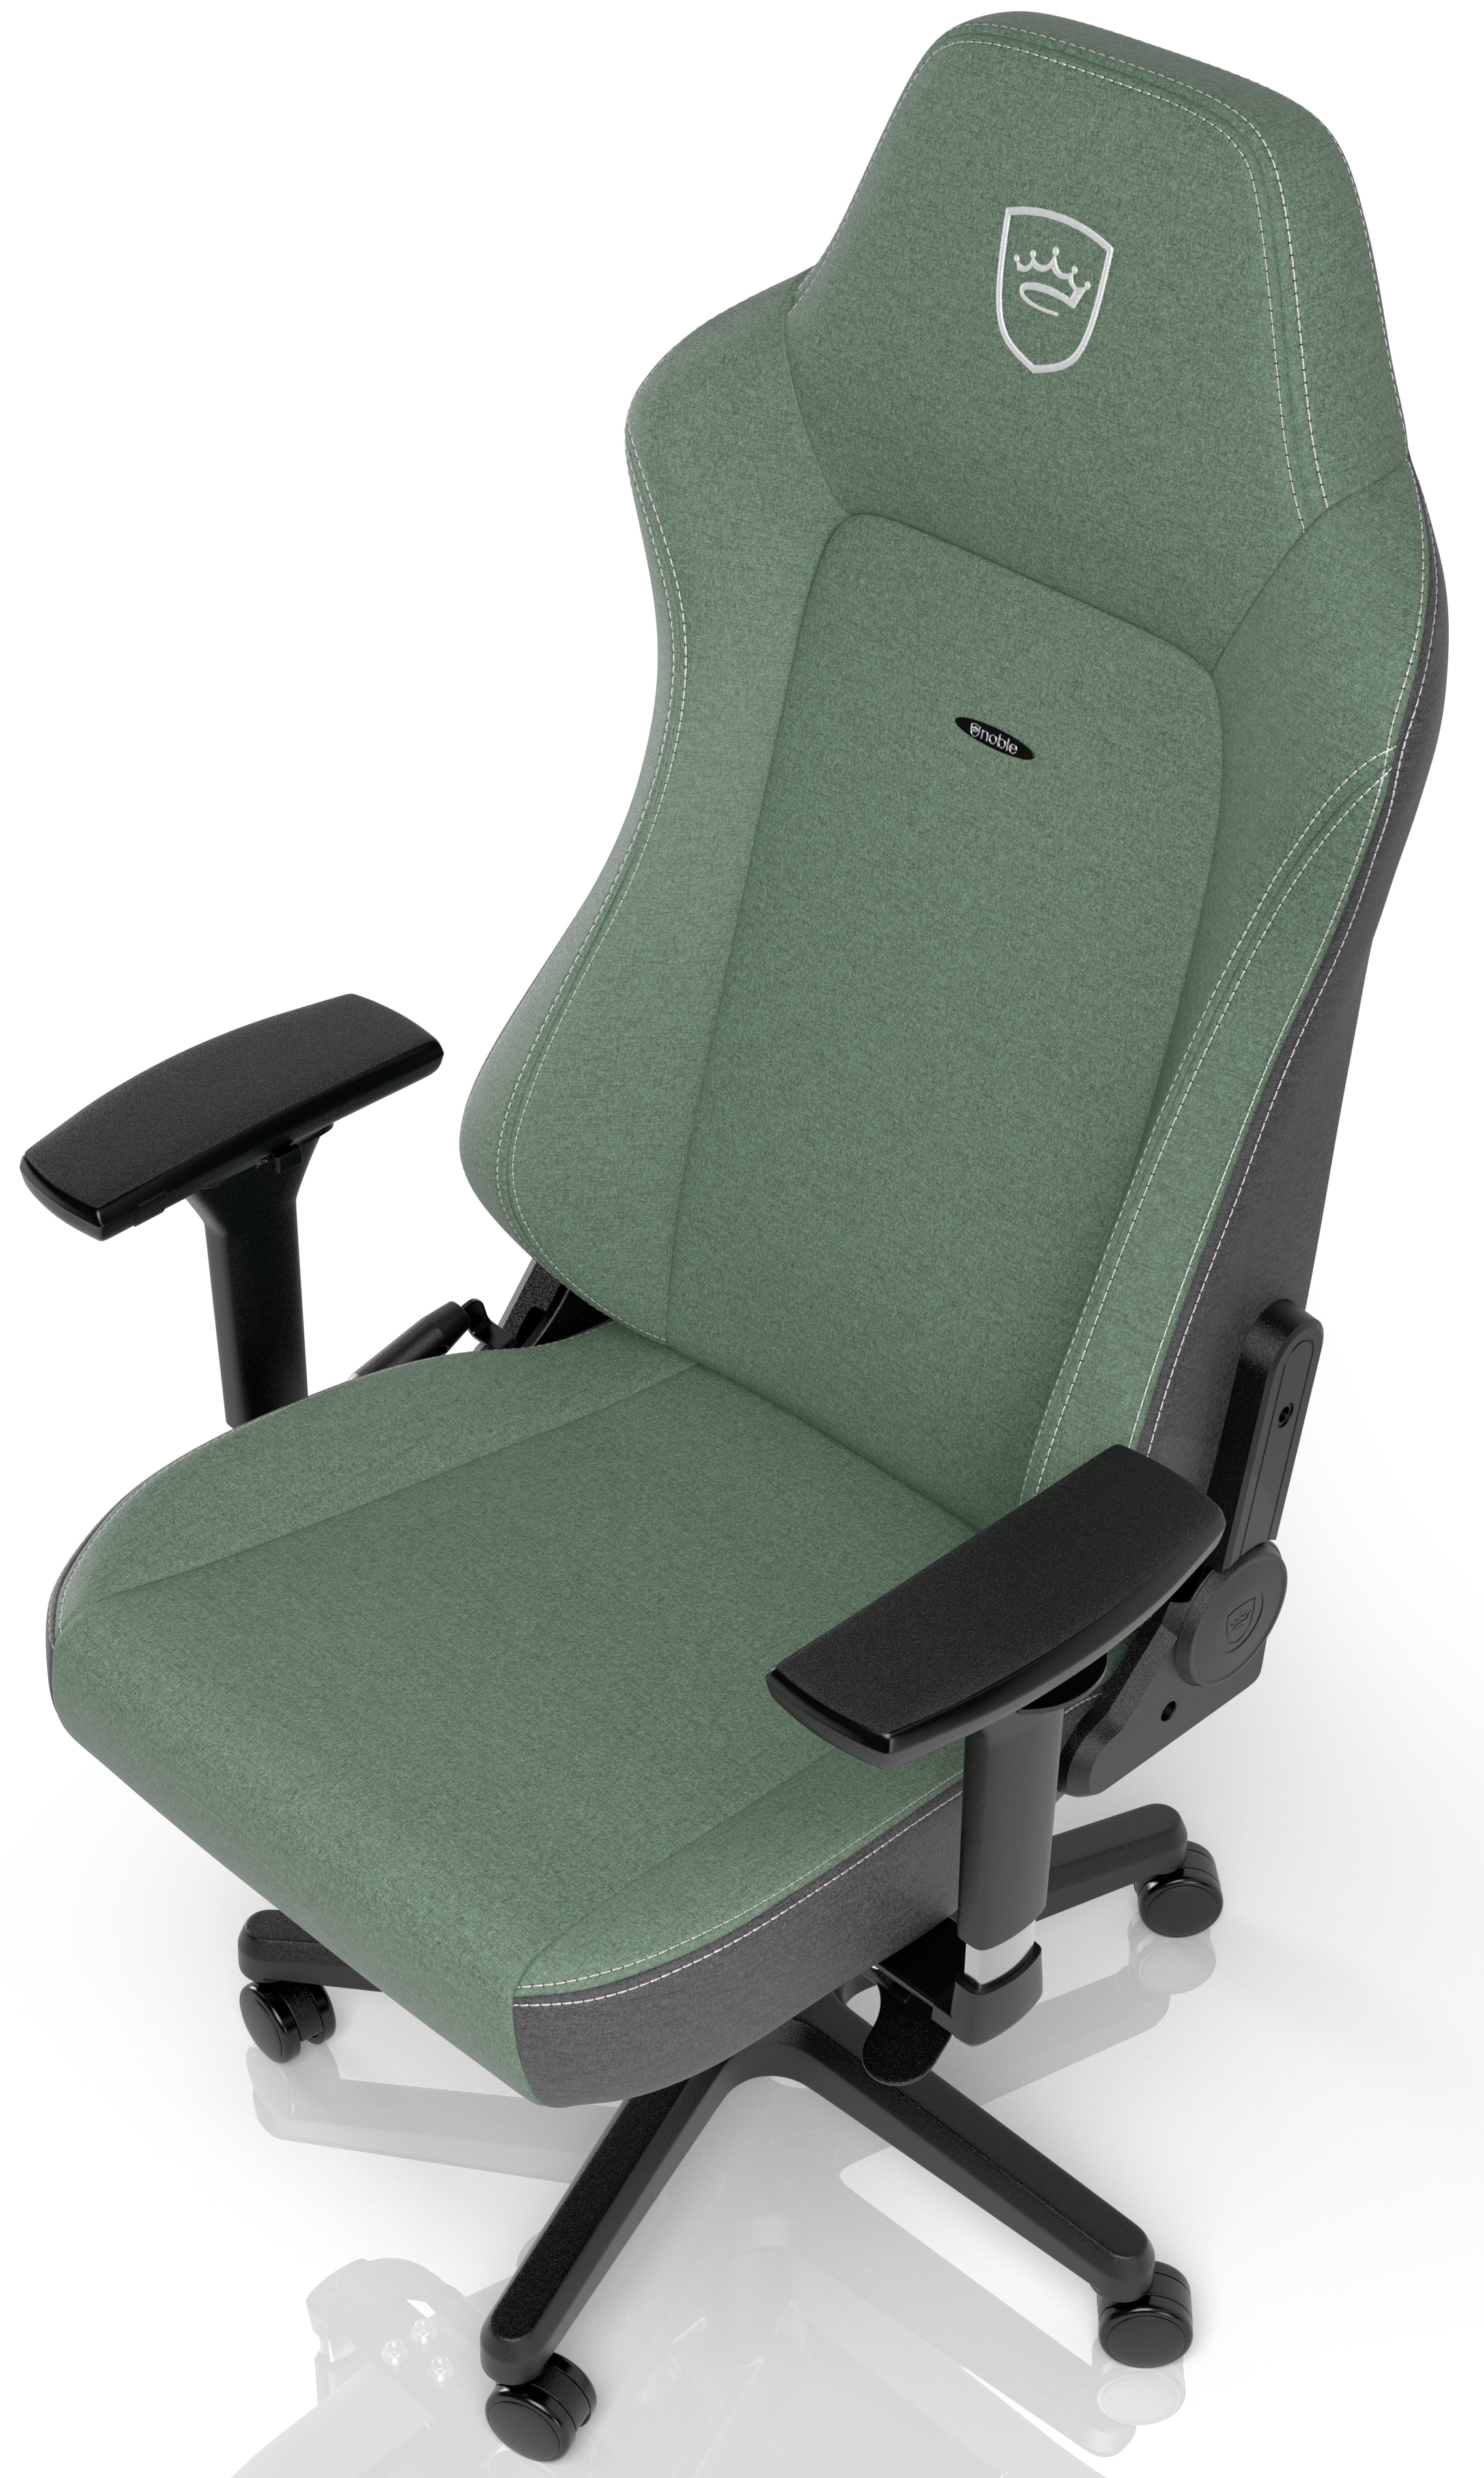 noblechairs - ** B Grade ** Cadeira noblechairs Hero Two Tone - Green Limited Edition